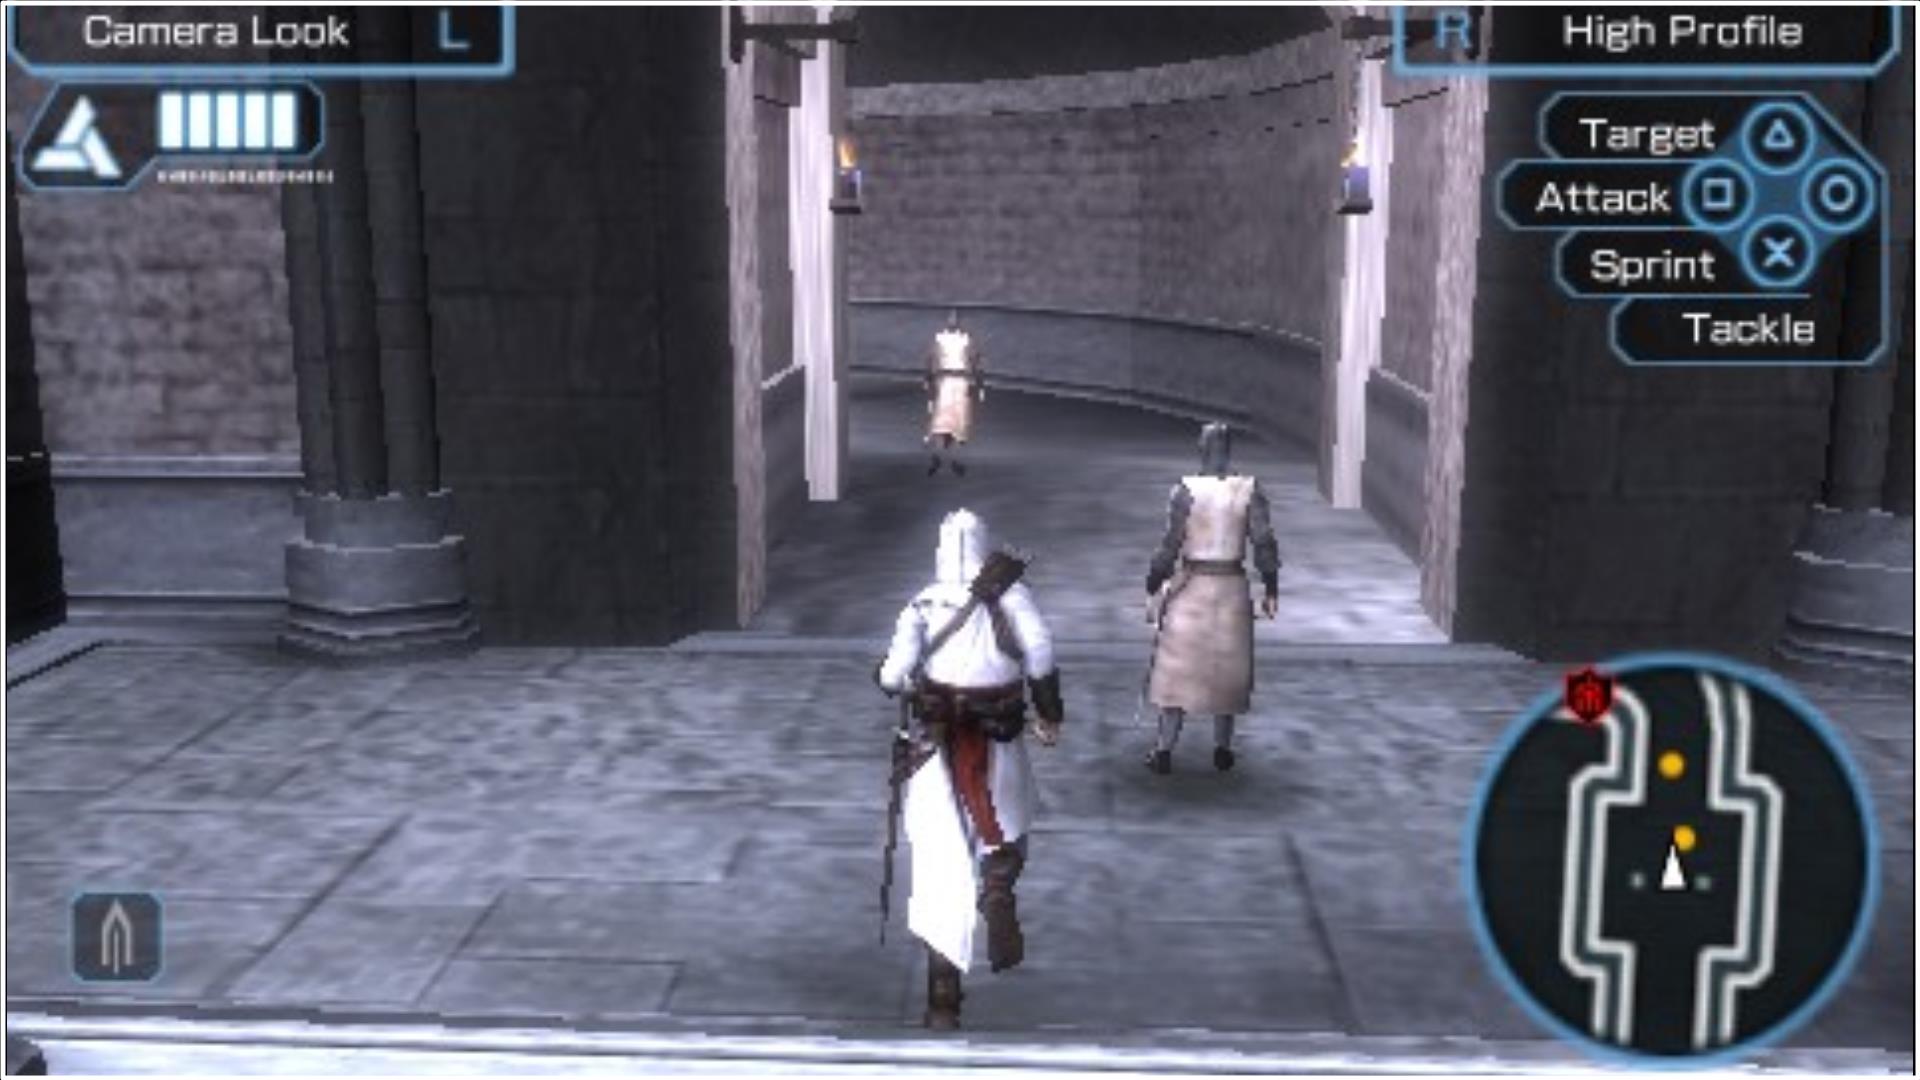 Assassin's Creed: Bloodlines - psp - Walkthrough and Guide - Page 1 -  GameSpy